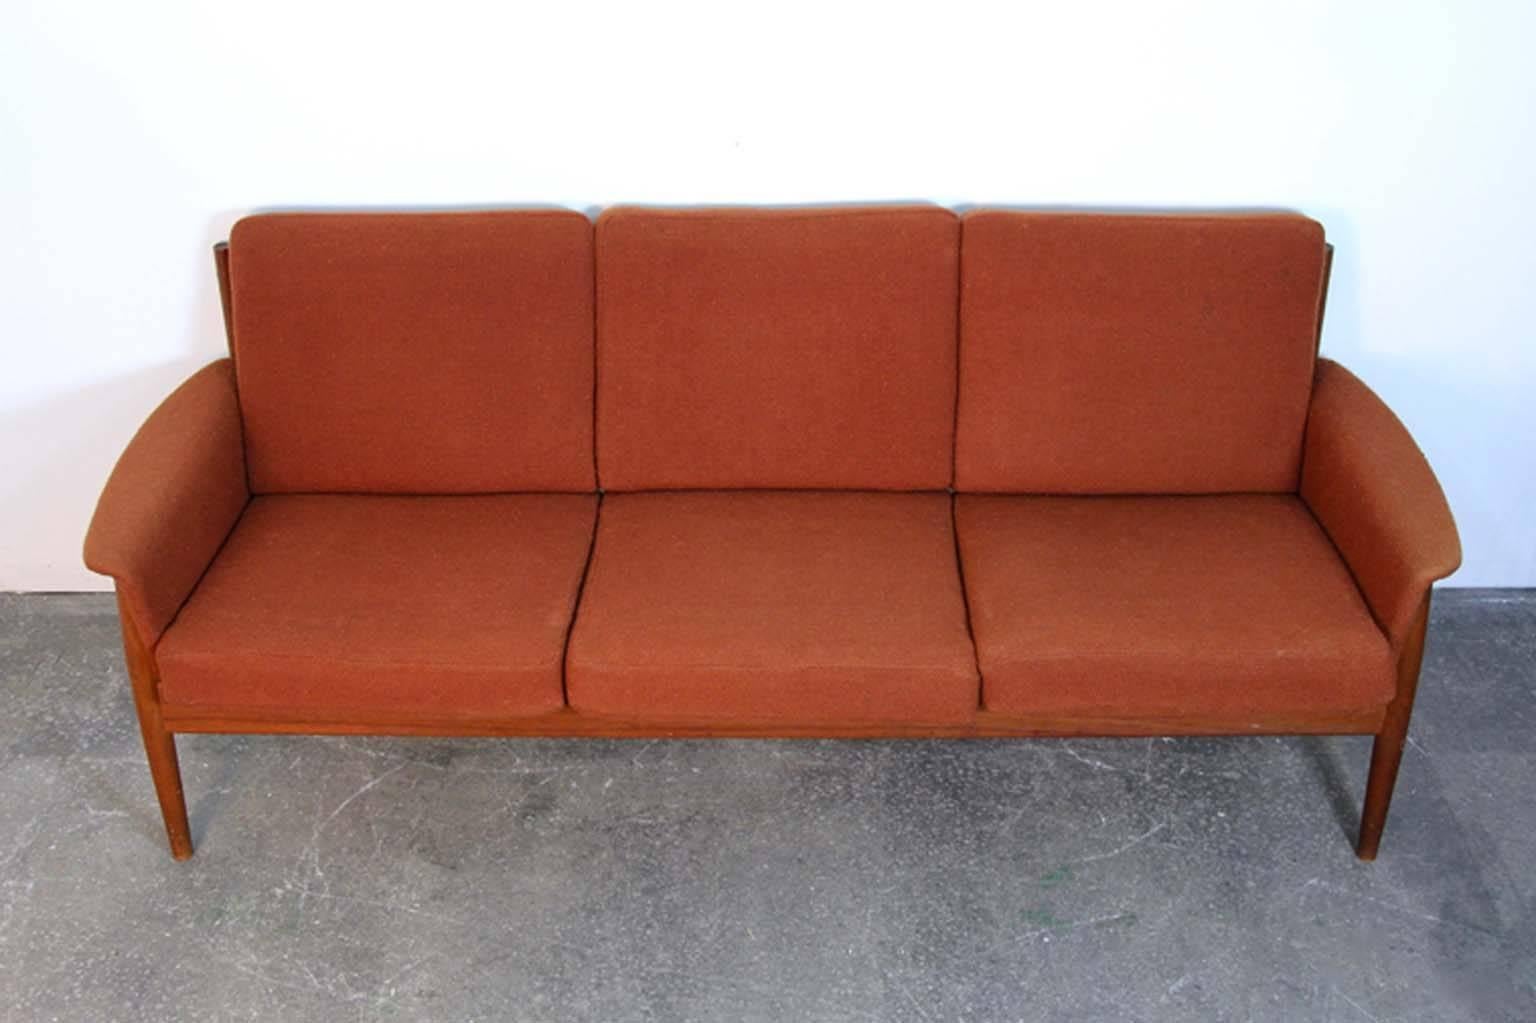 Grete Jalk teak sofa. Imported by John Stuart, labelled, three-seat sofa in original fabric. Has upholstered arms and cushions.